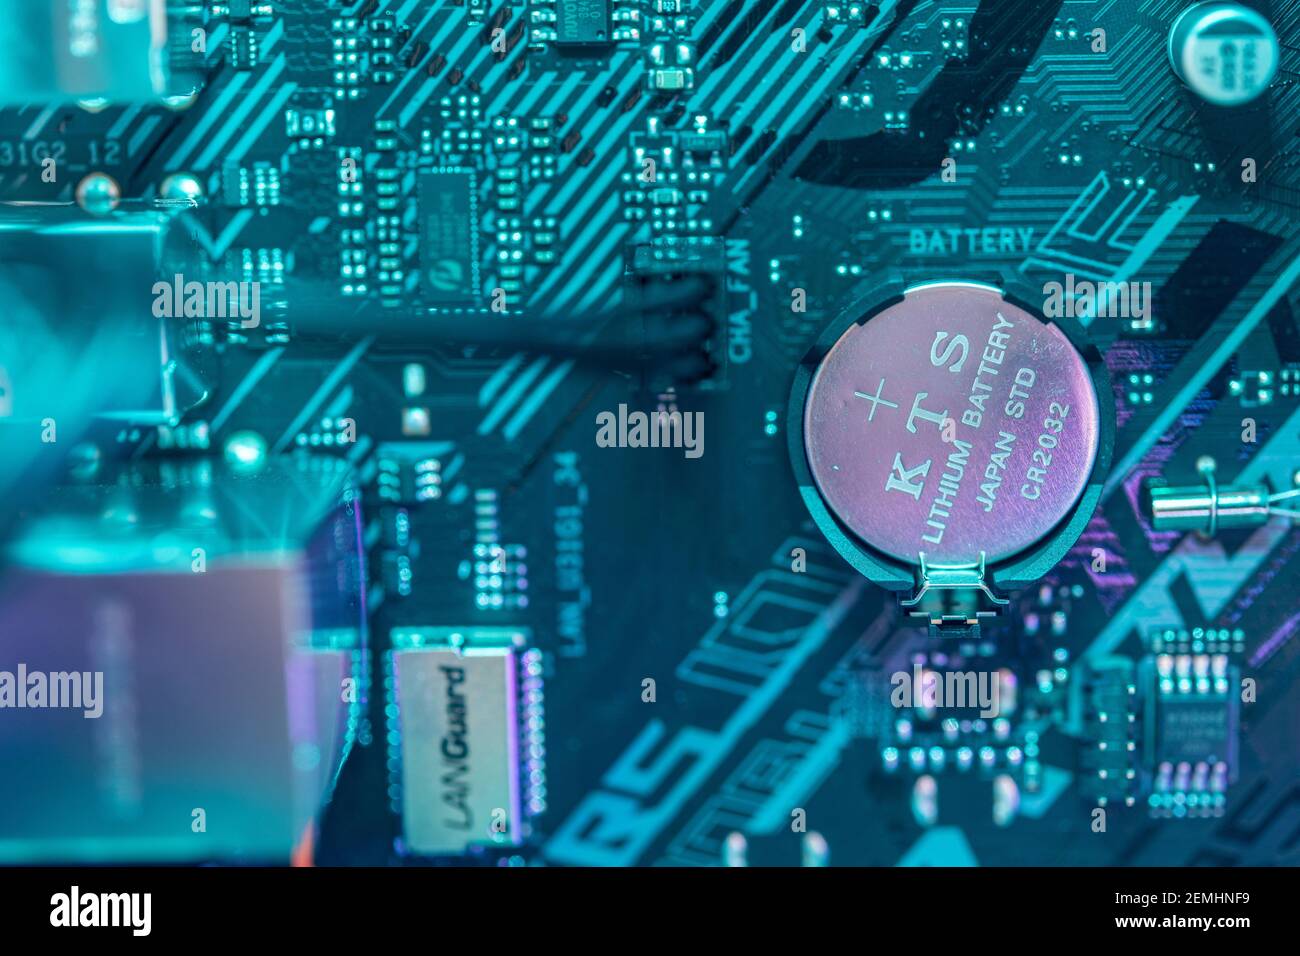 KTS Lithium Battery in a gaming computer motherboard Stock Photo - Alamy